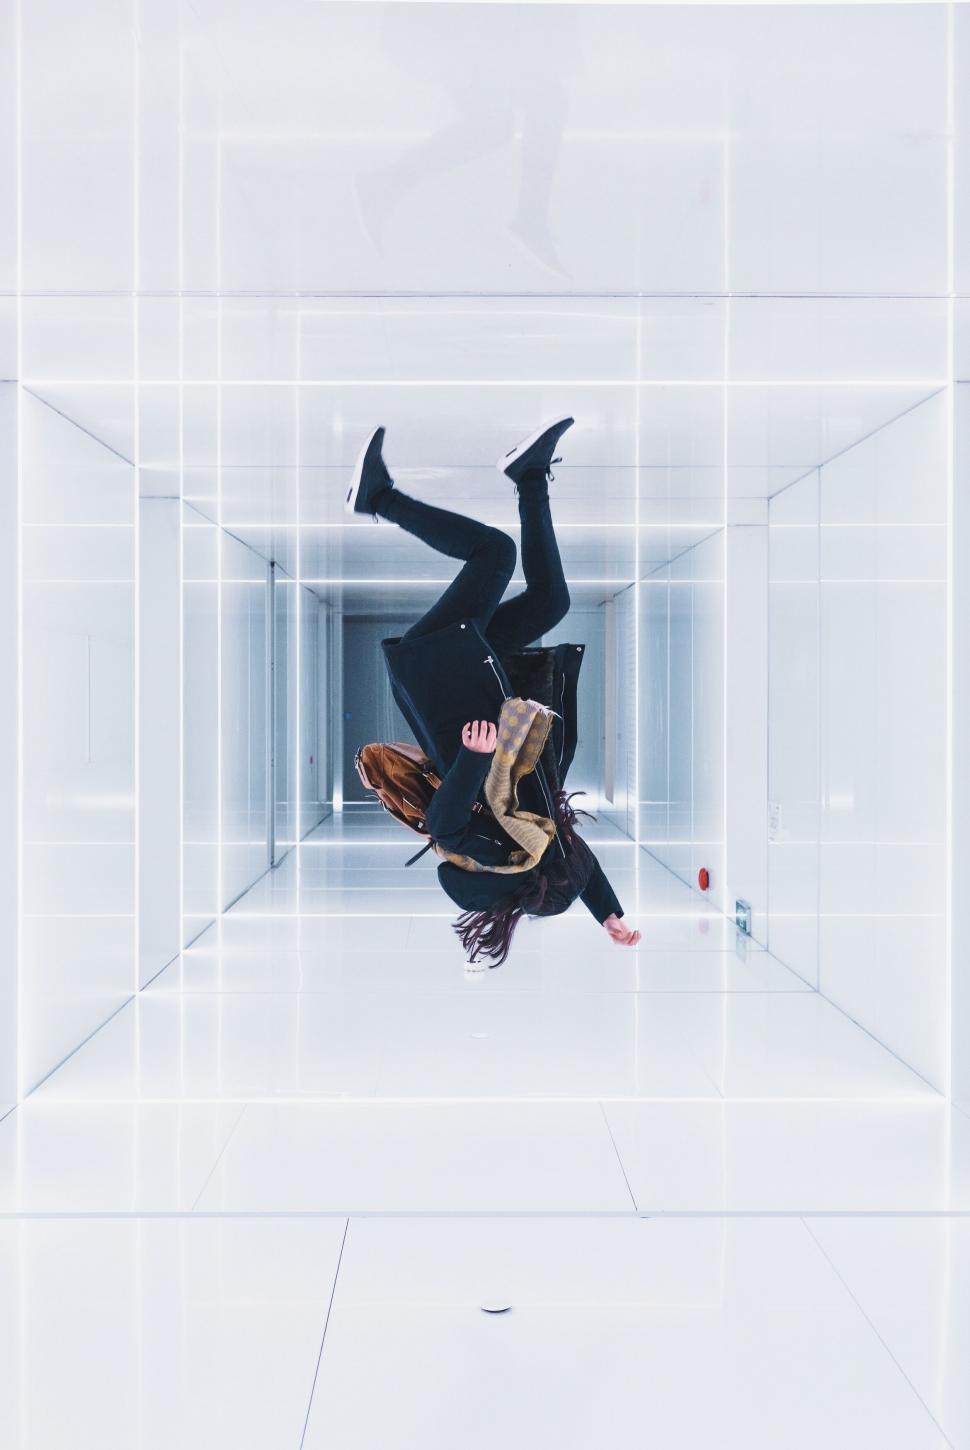 Free Image of A person in a white room 